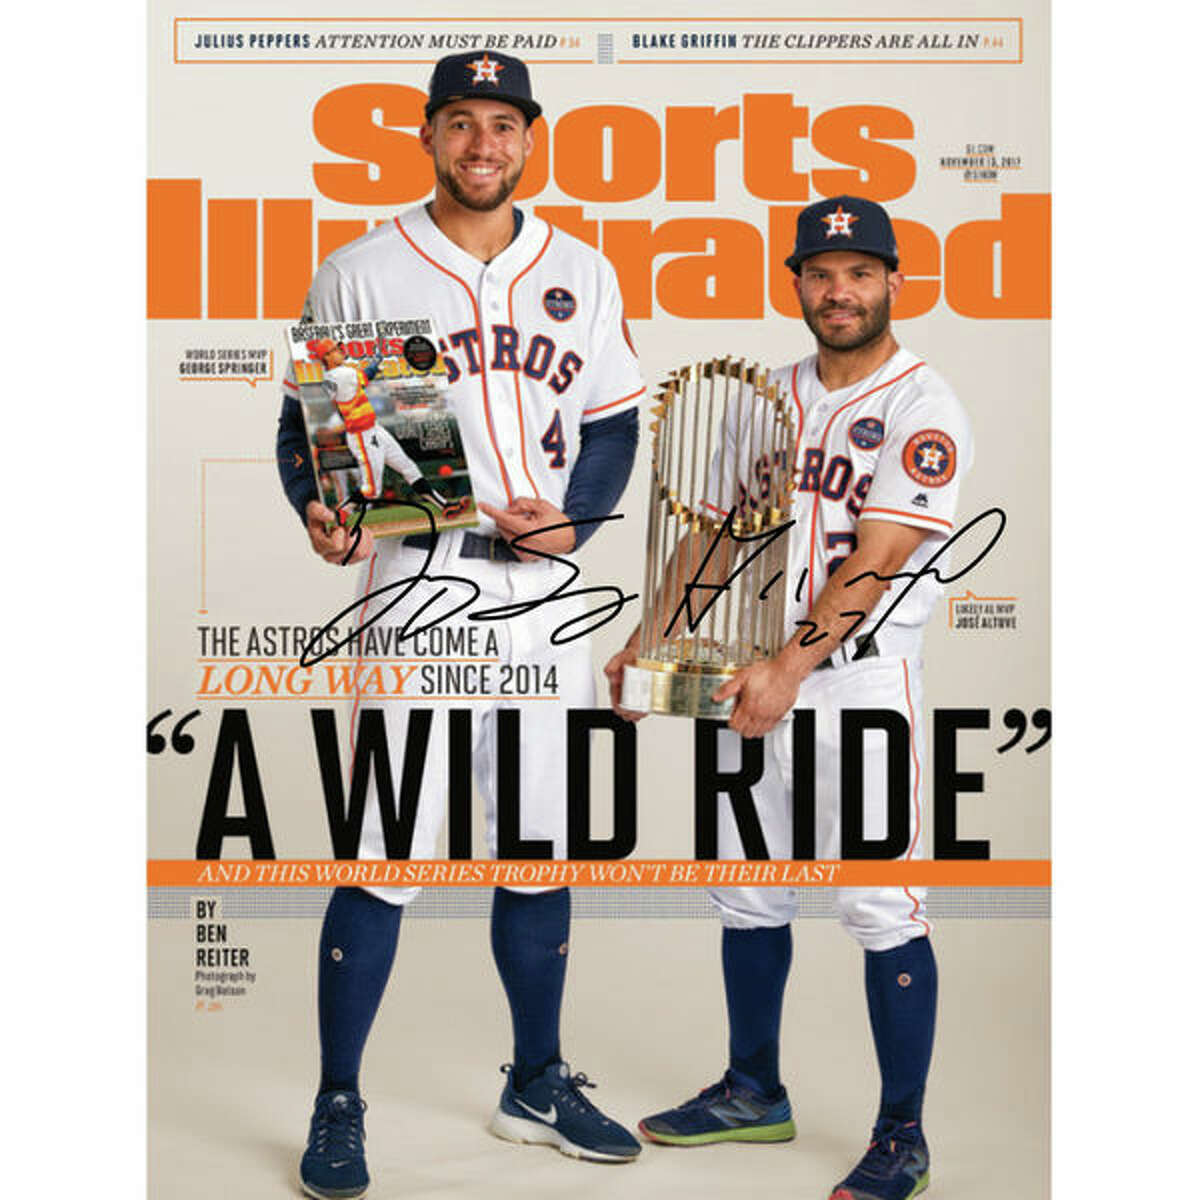 George Springer and Jose Altuve autographed 16"x 20" Wild Ride Sports Illustrated Cover Photograph: This collector's item is signed by both AL MVP Jose Altuve and World Series MVP George Springer, making it the ultimate double-play of signed Astros collectibles. (See price & more details)